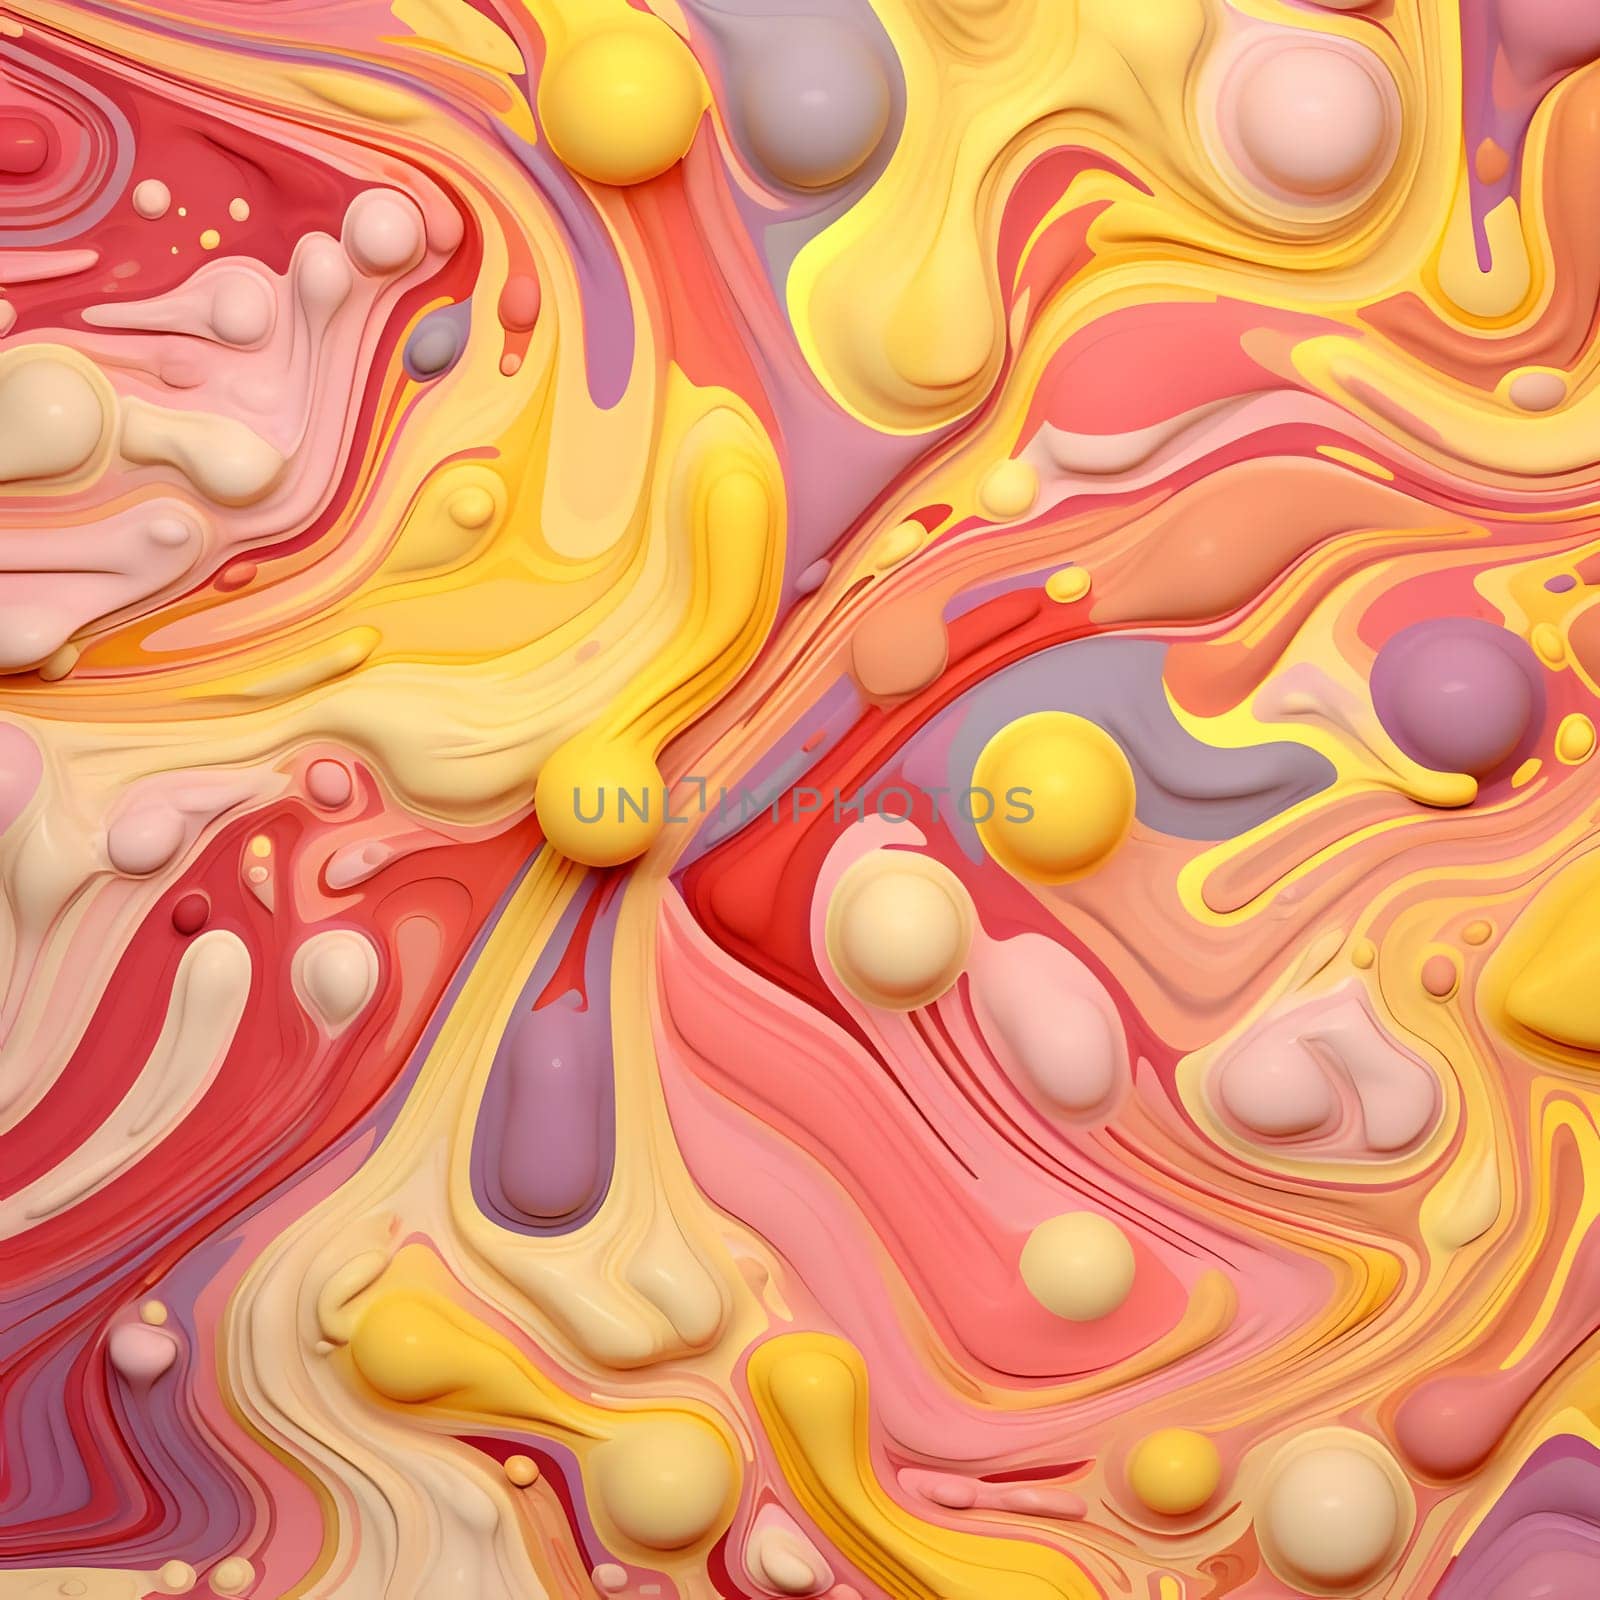 Patterns and banners backgrounds: Colorful abstract background. Liquid marble pattern. 3d render illustration